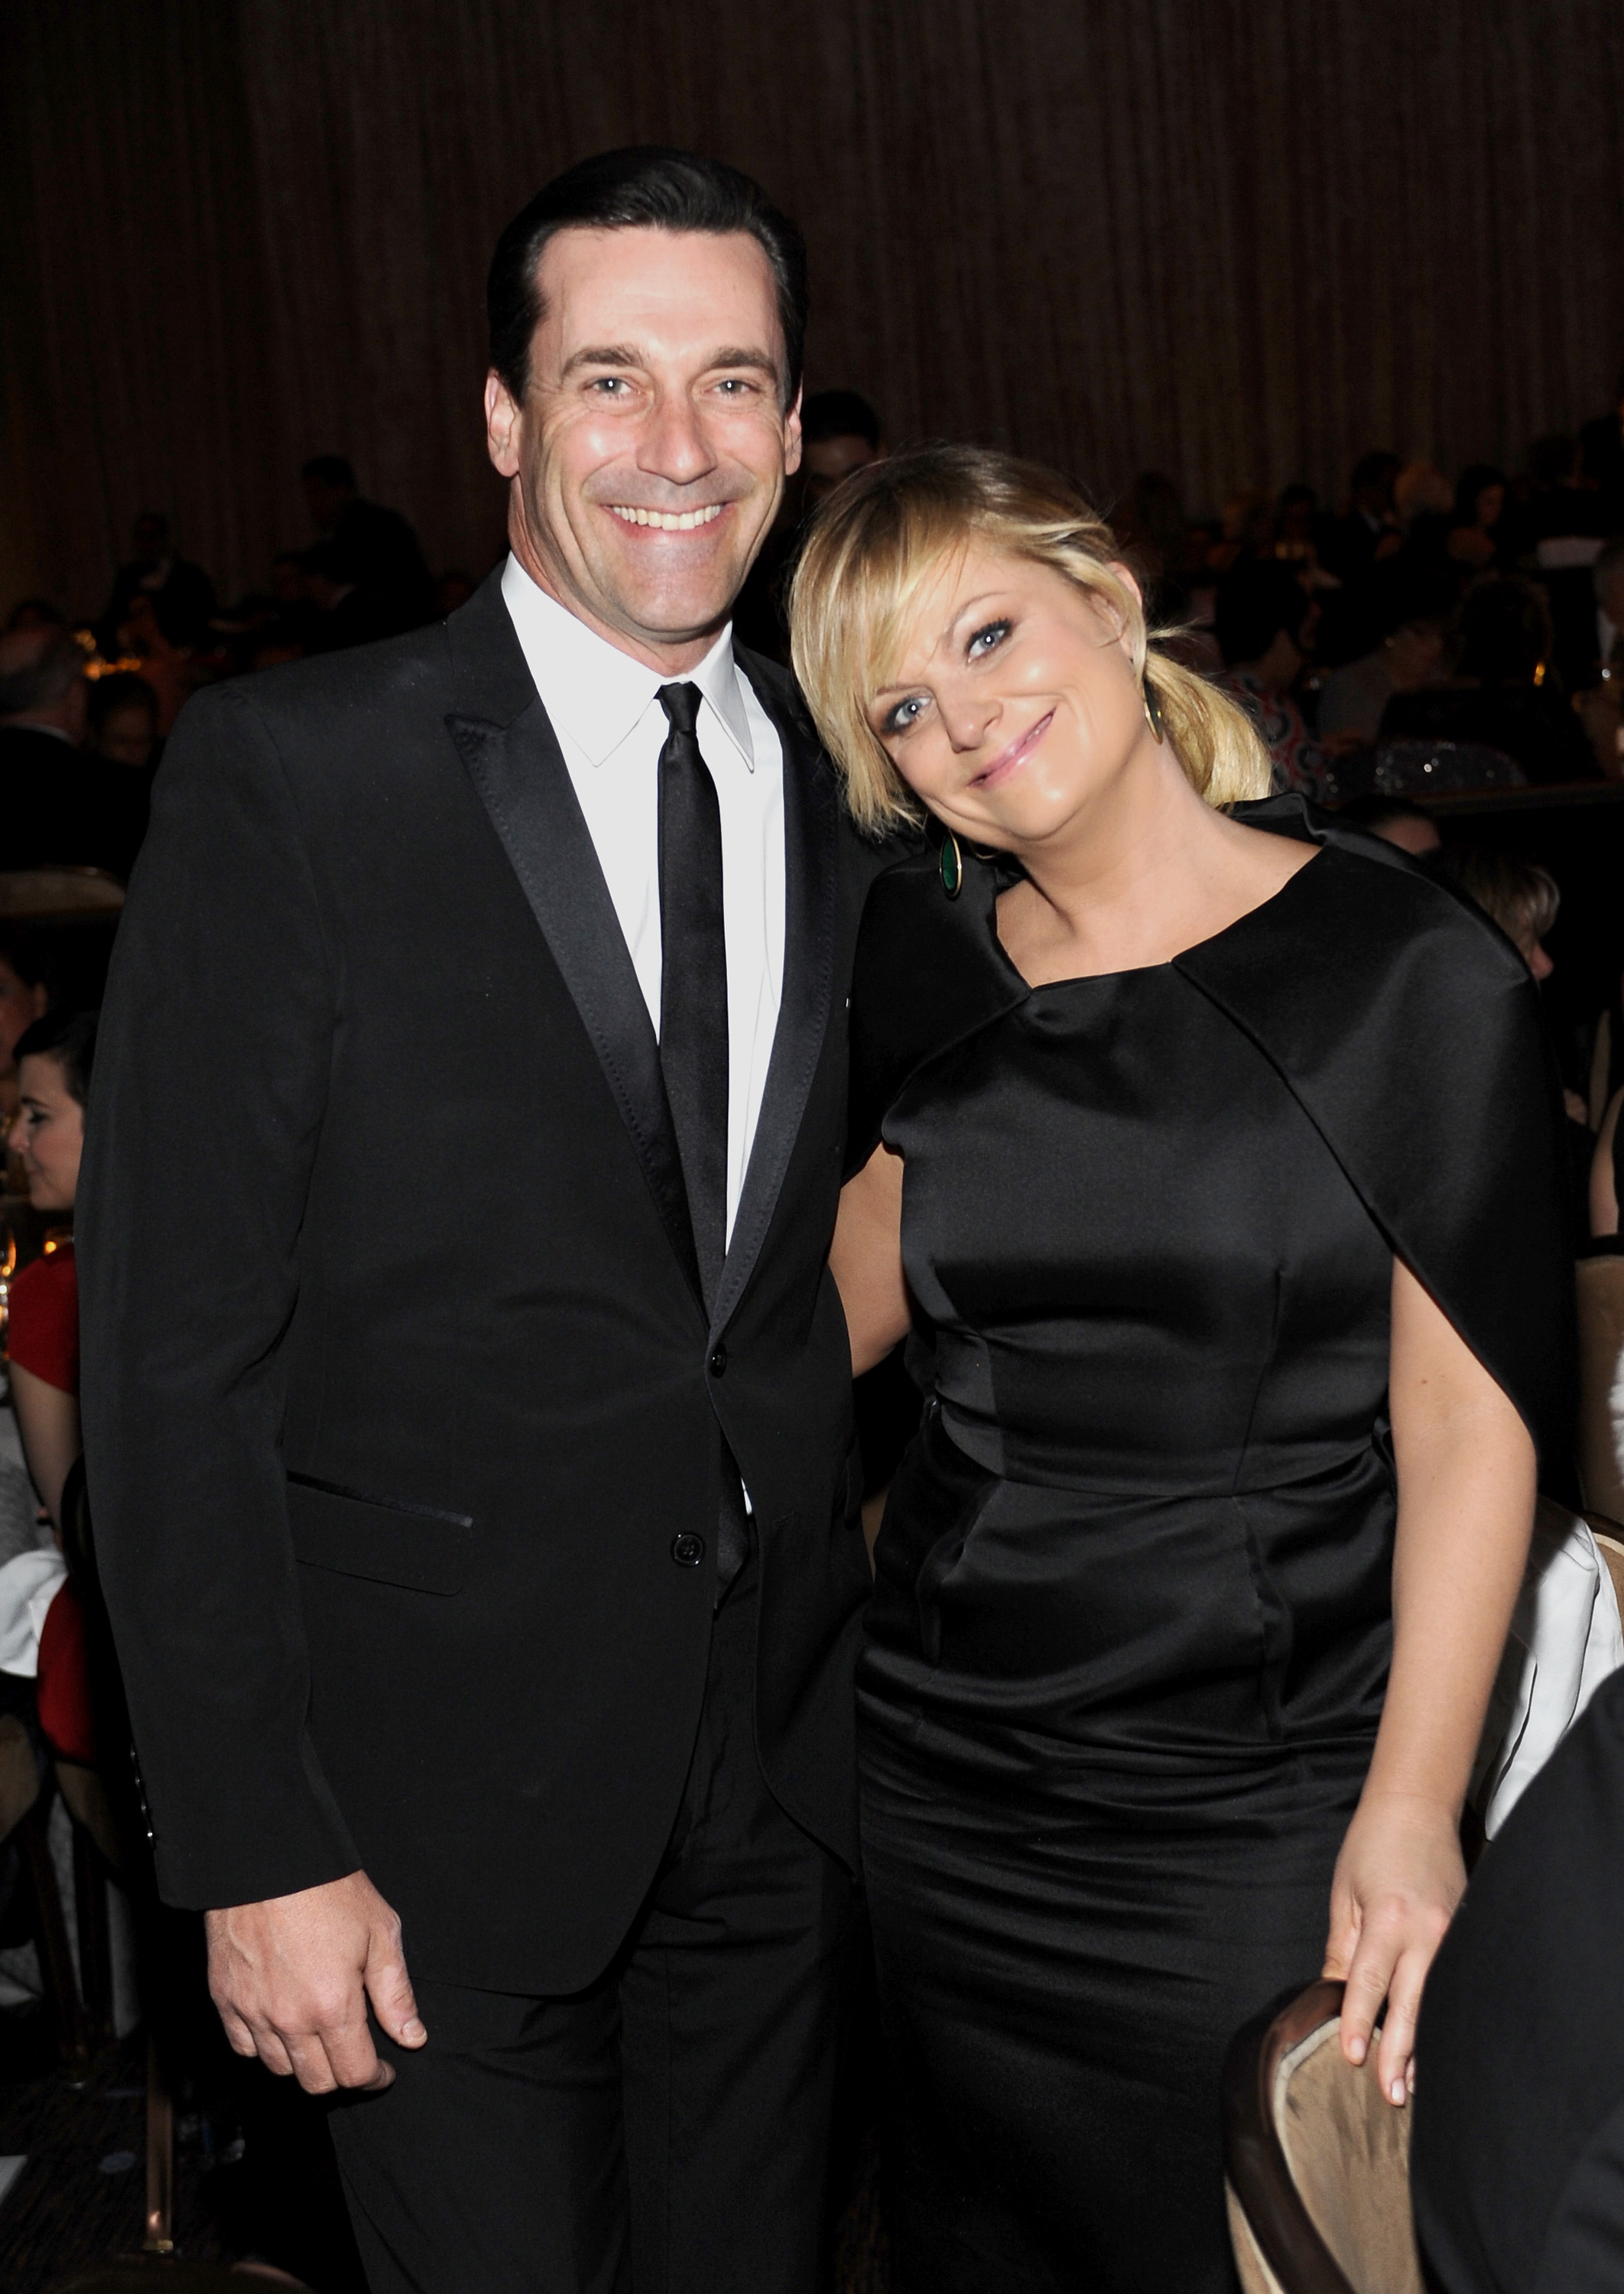 Actors Jon Hamm and Amy Poehler attend the 15th Annual Costume Designers Guild Awards at The Beverly Hilton Hotel on February 19, 2013 in Beverly Hills, California. (Stefanie Keenan—CDG/Getty Images)